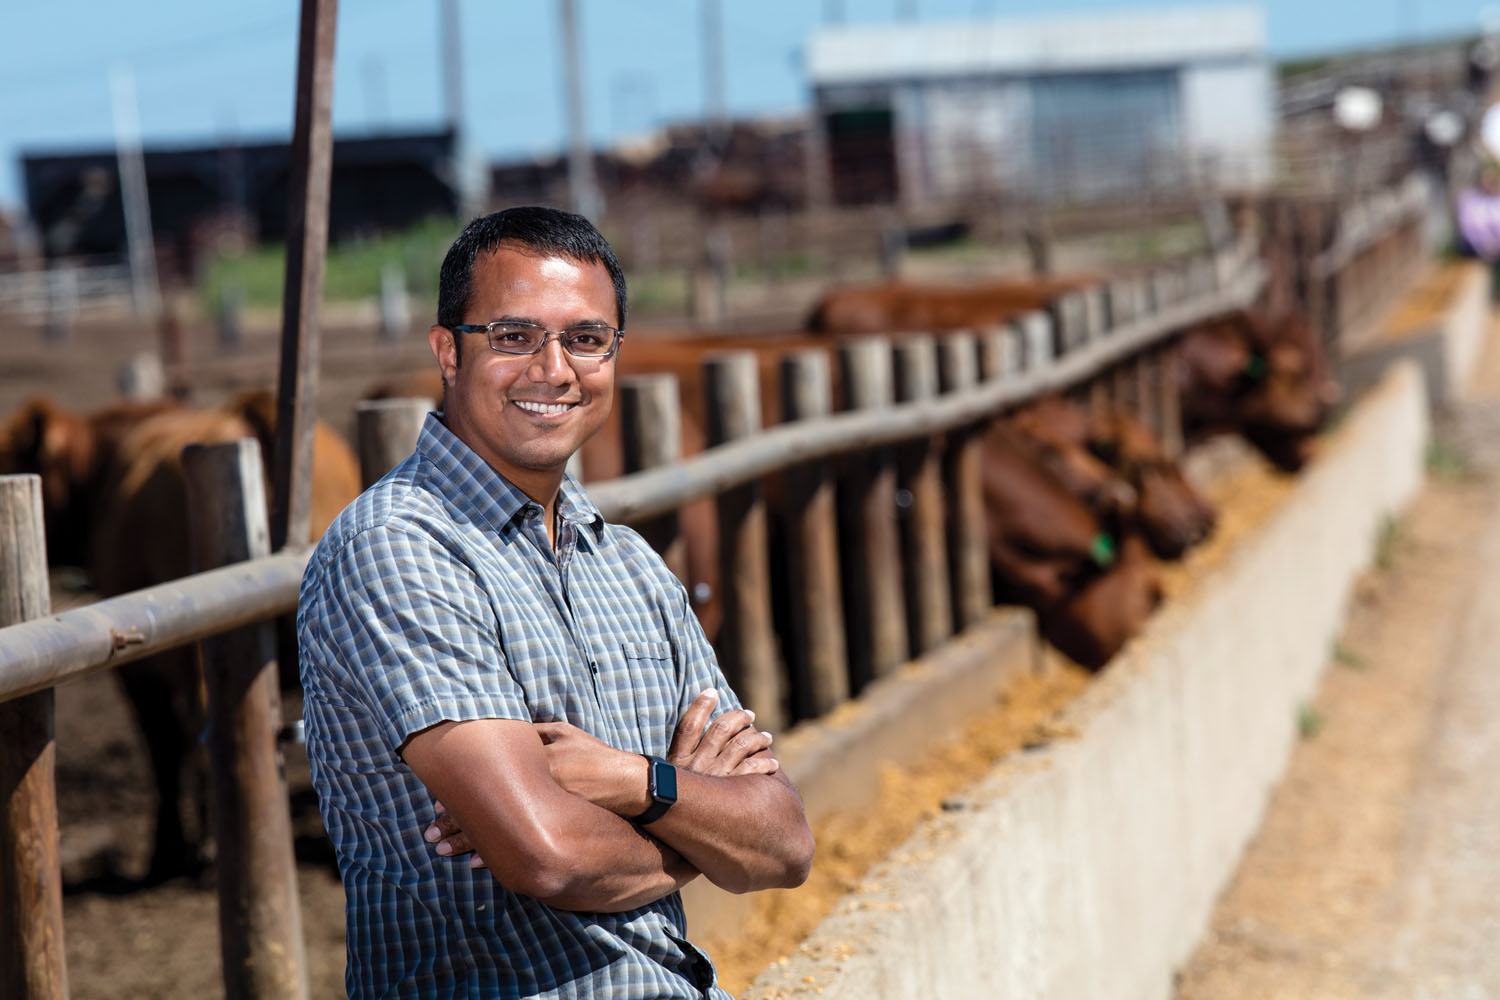 Lincoln-based startup Quantified Ag acquired by Merck Animal Health